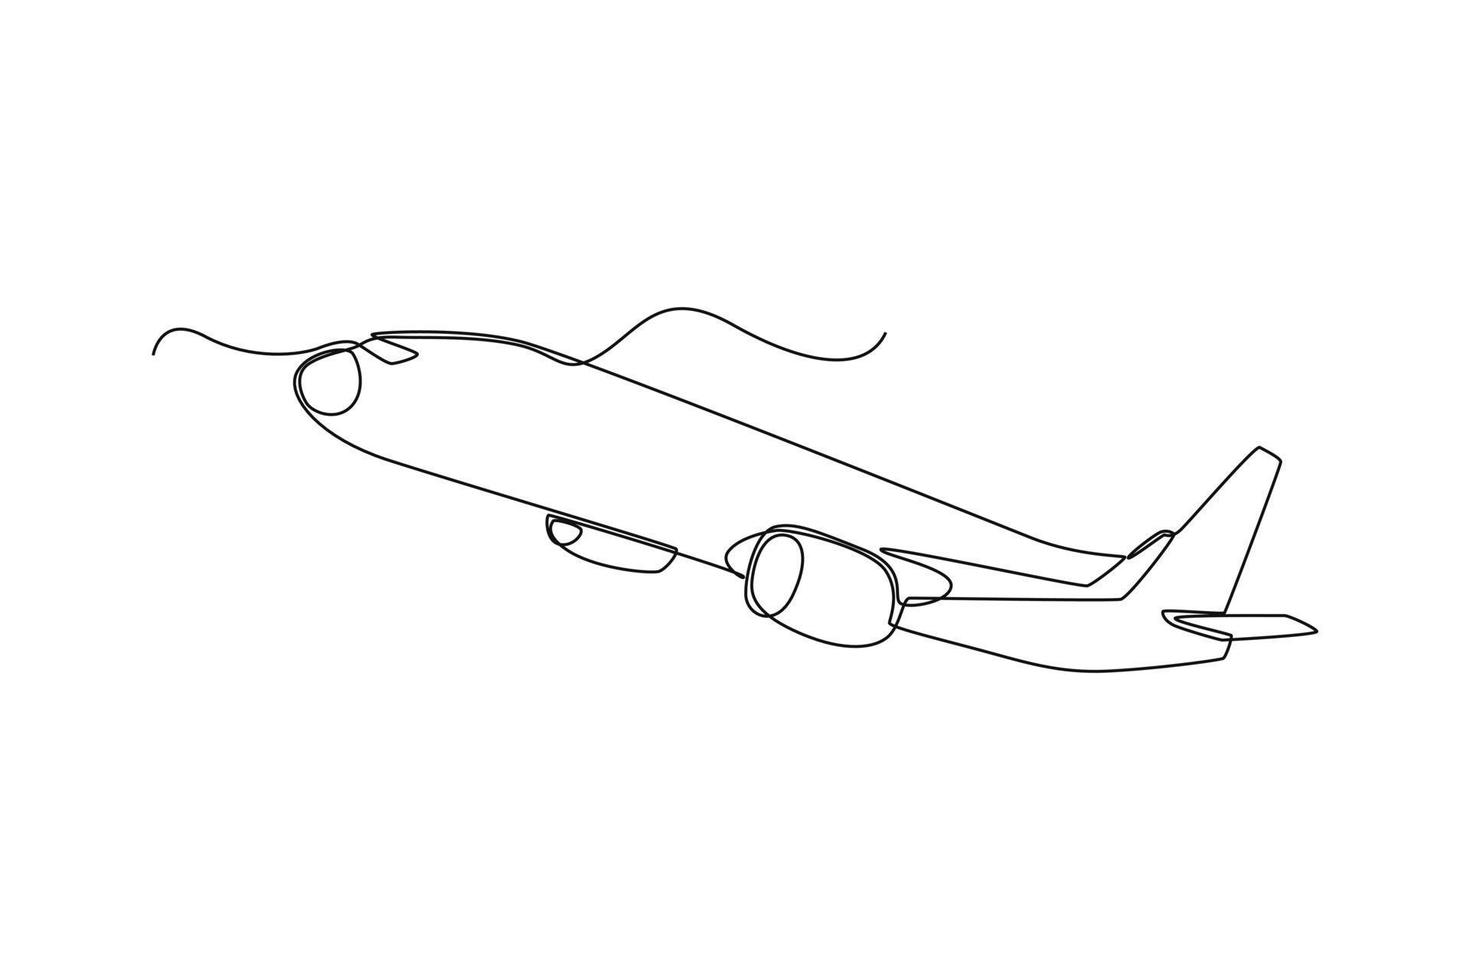 Single one line drawing airplane. Air transportation concept. Continuous line draw design graphic vector illustration.